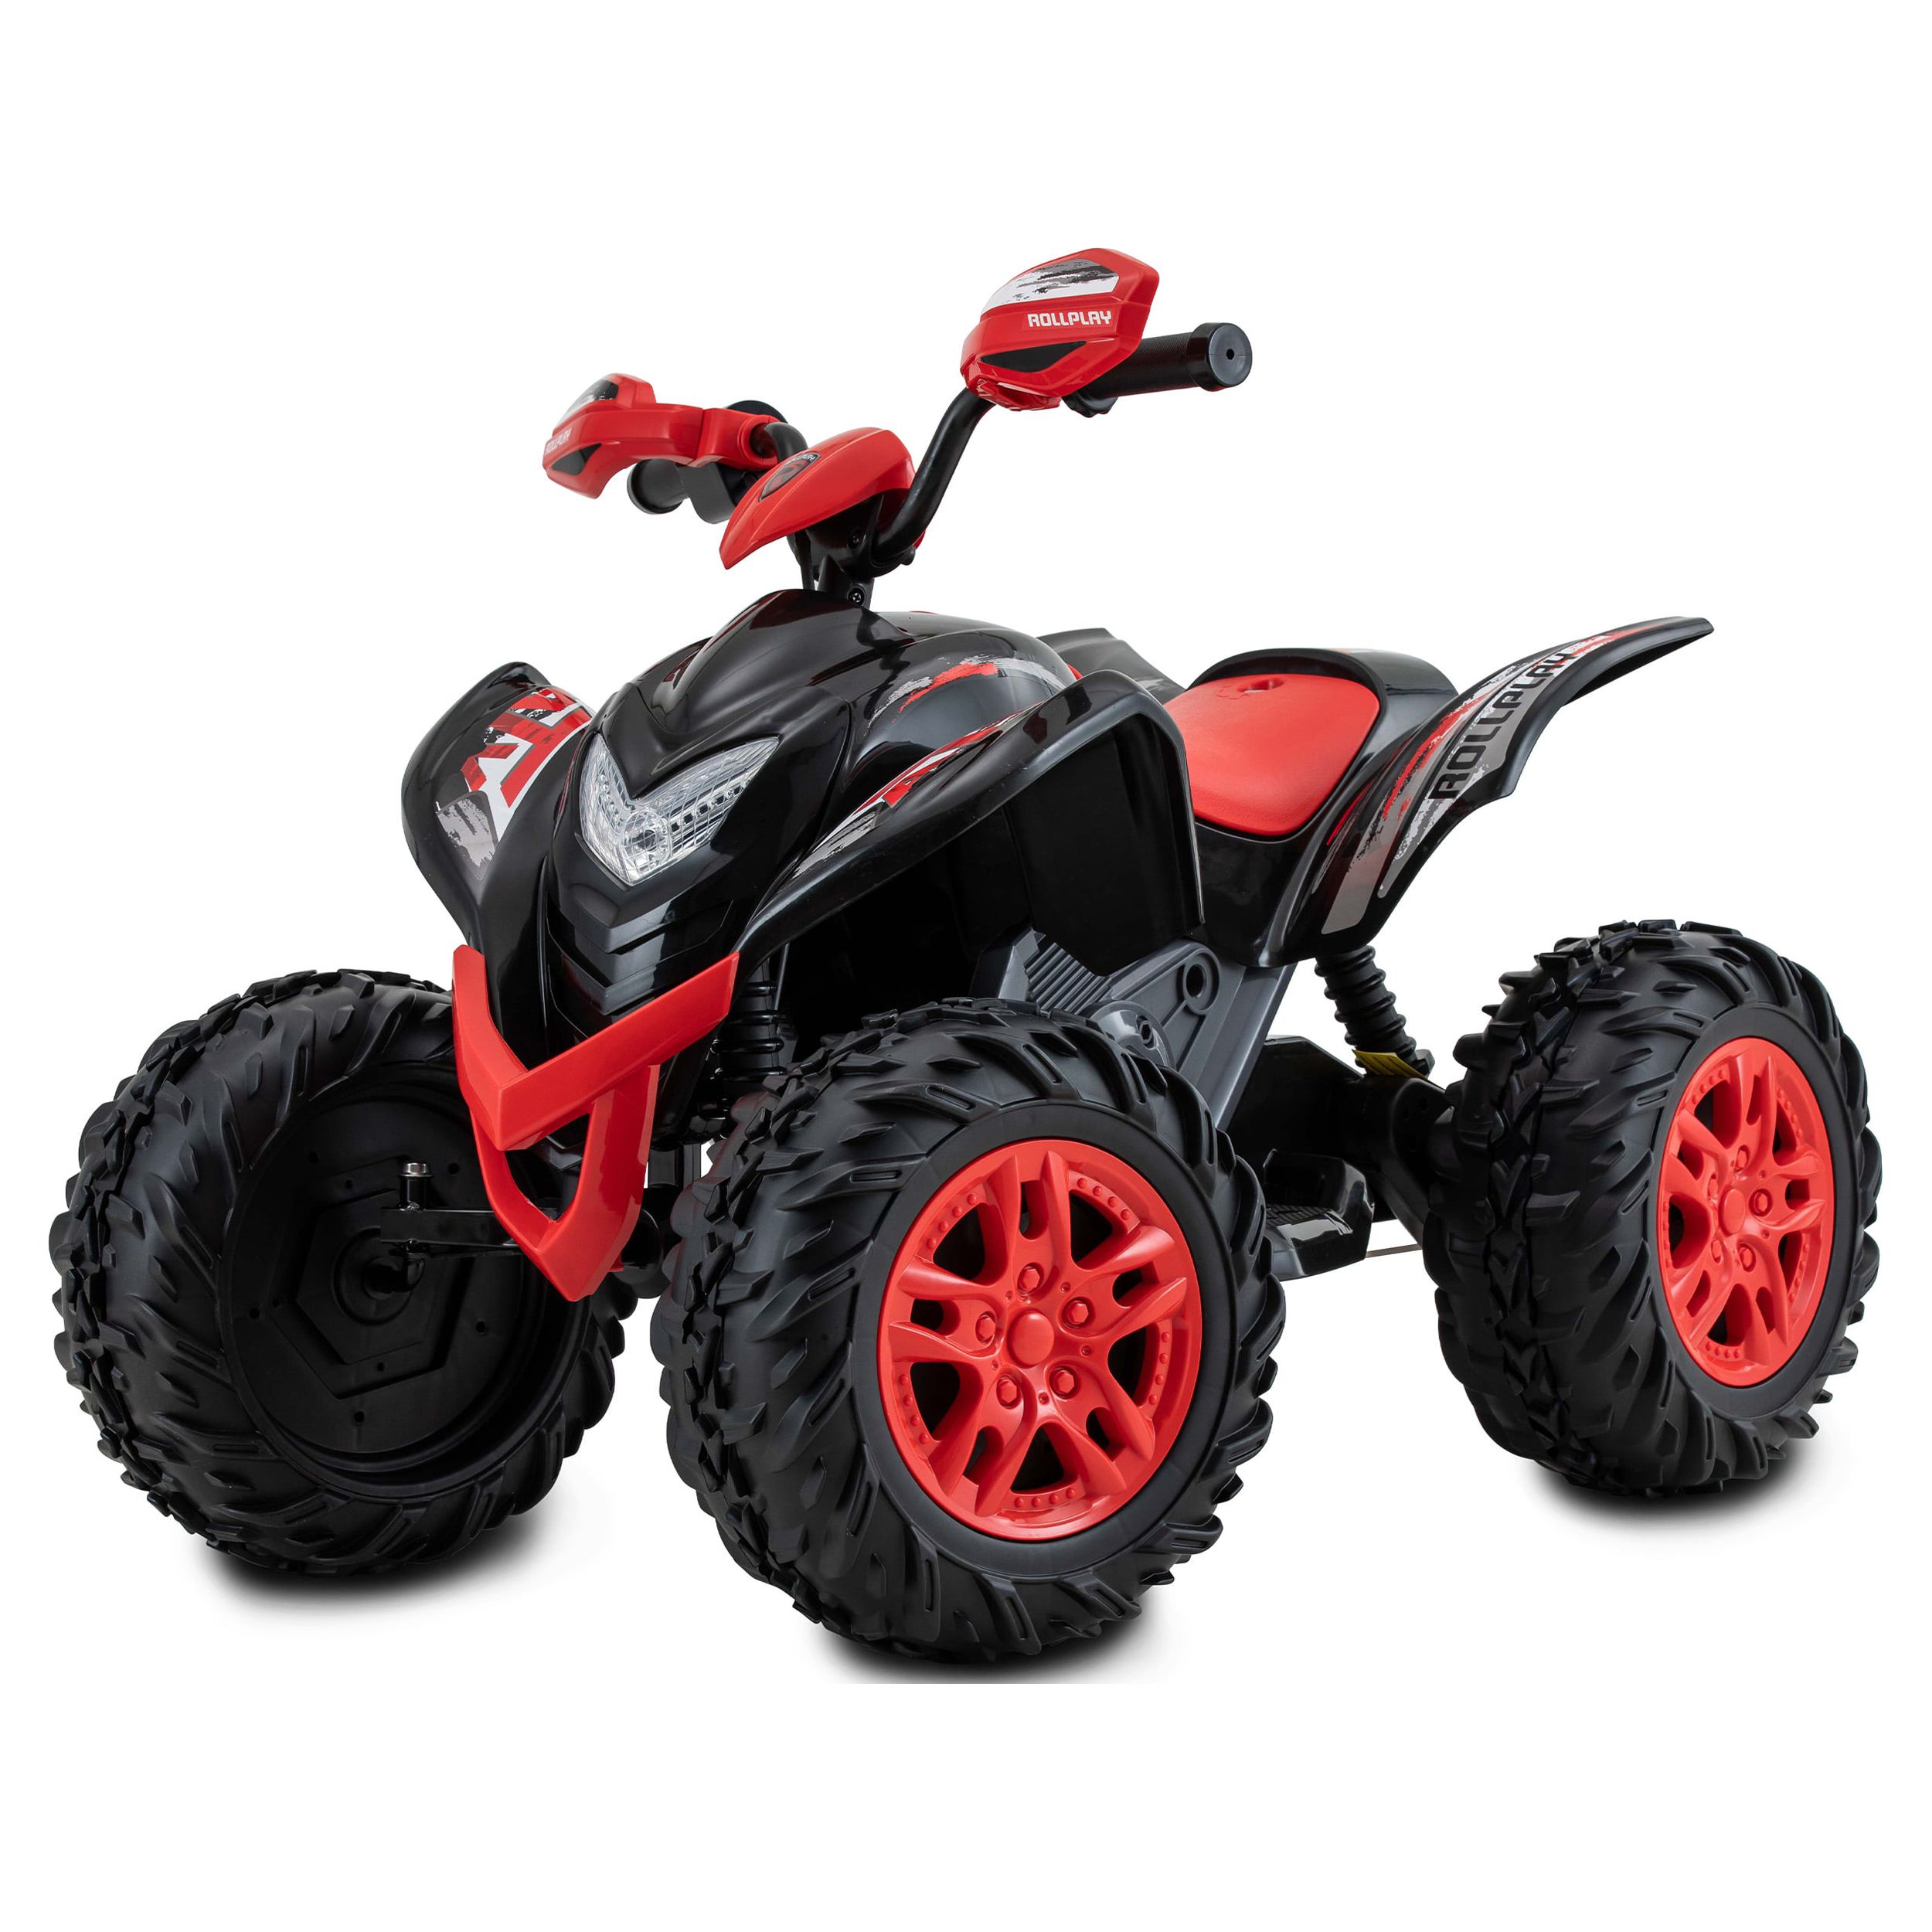 Powersport ATV MAX 12-Volt Battery Ride-On (Red / Black) - image 1 of 9